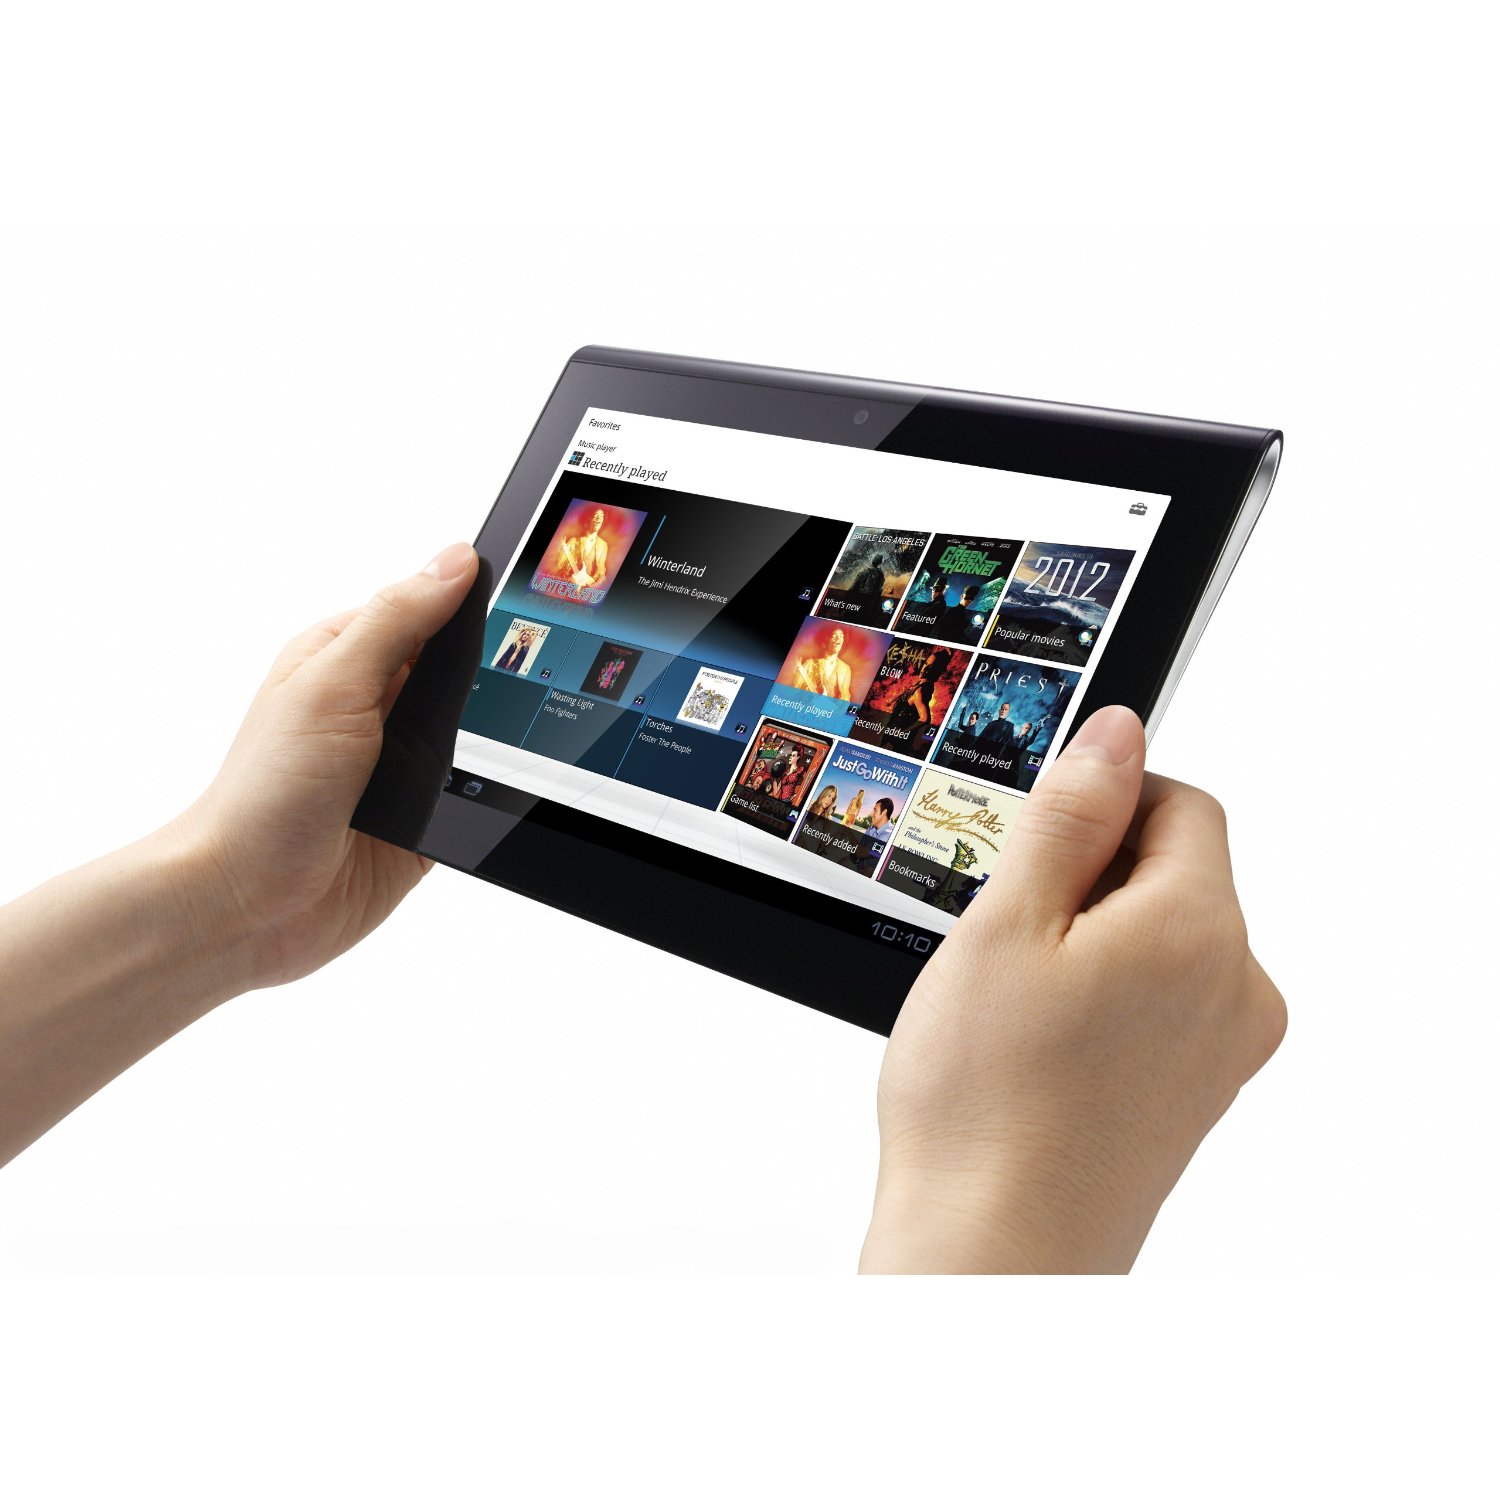 http://thetechjournal.com/wp-content/uploads/images/1109/1316407190-sony-sgpt111uss-wifi-16gb-tablet-8.jpg